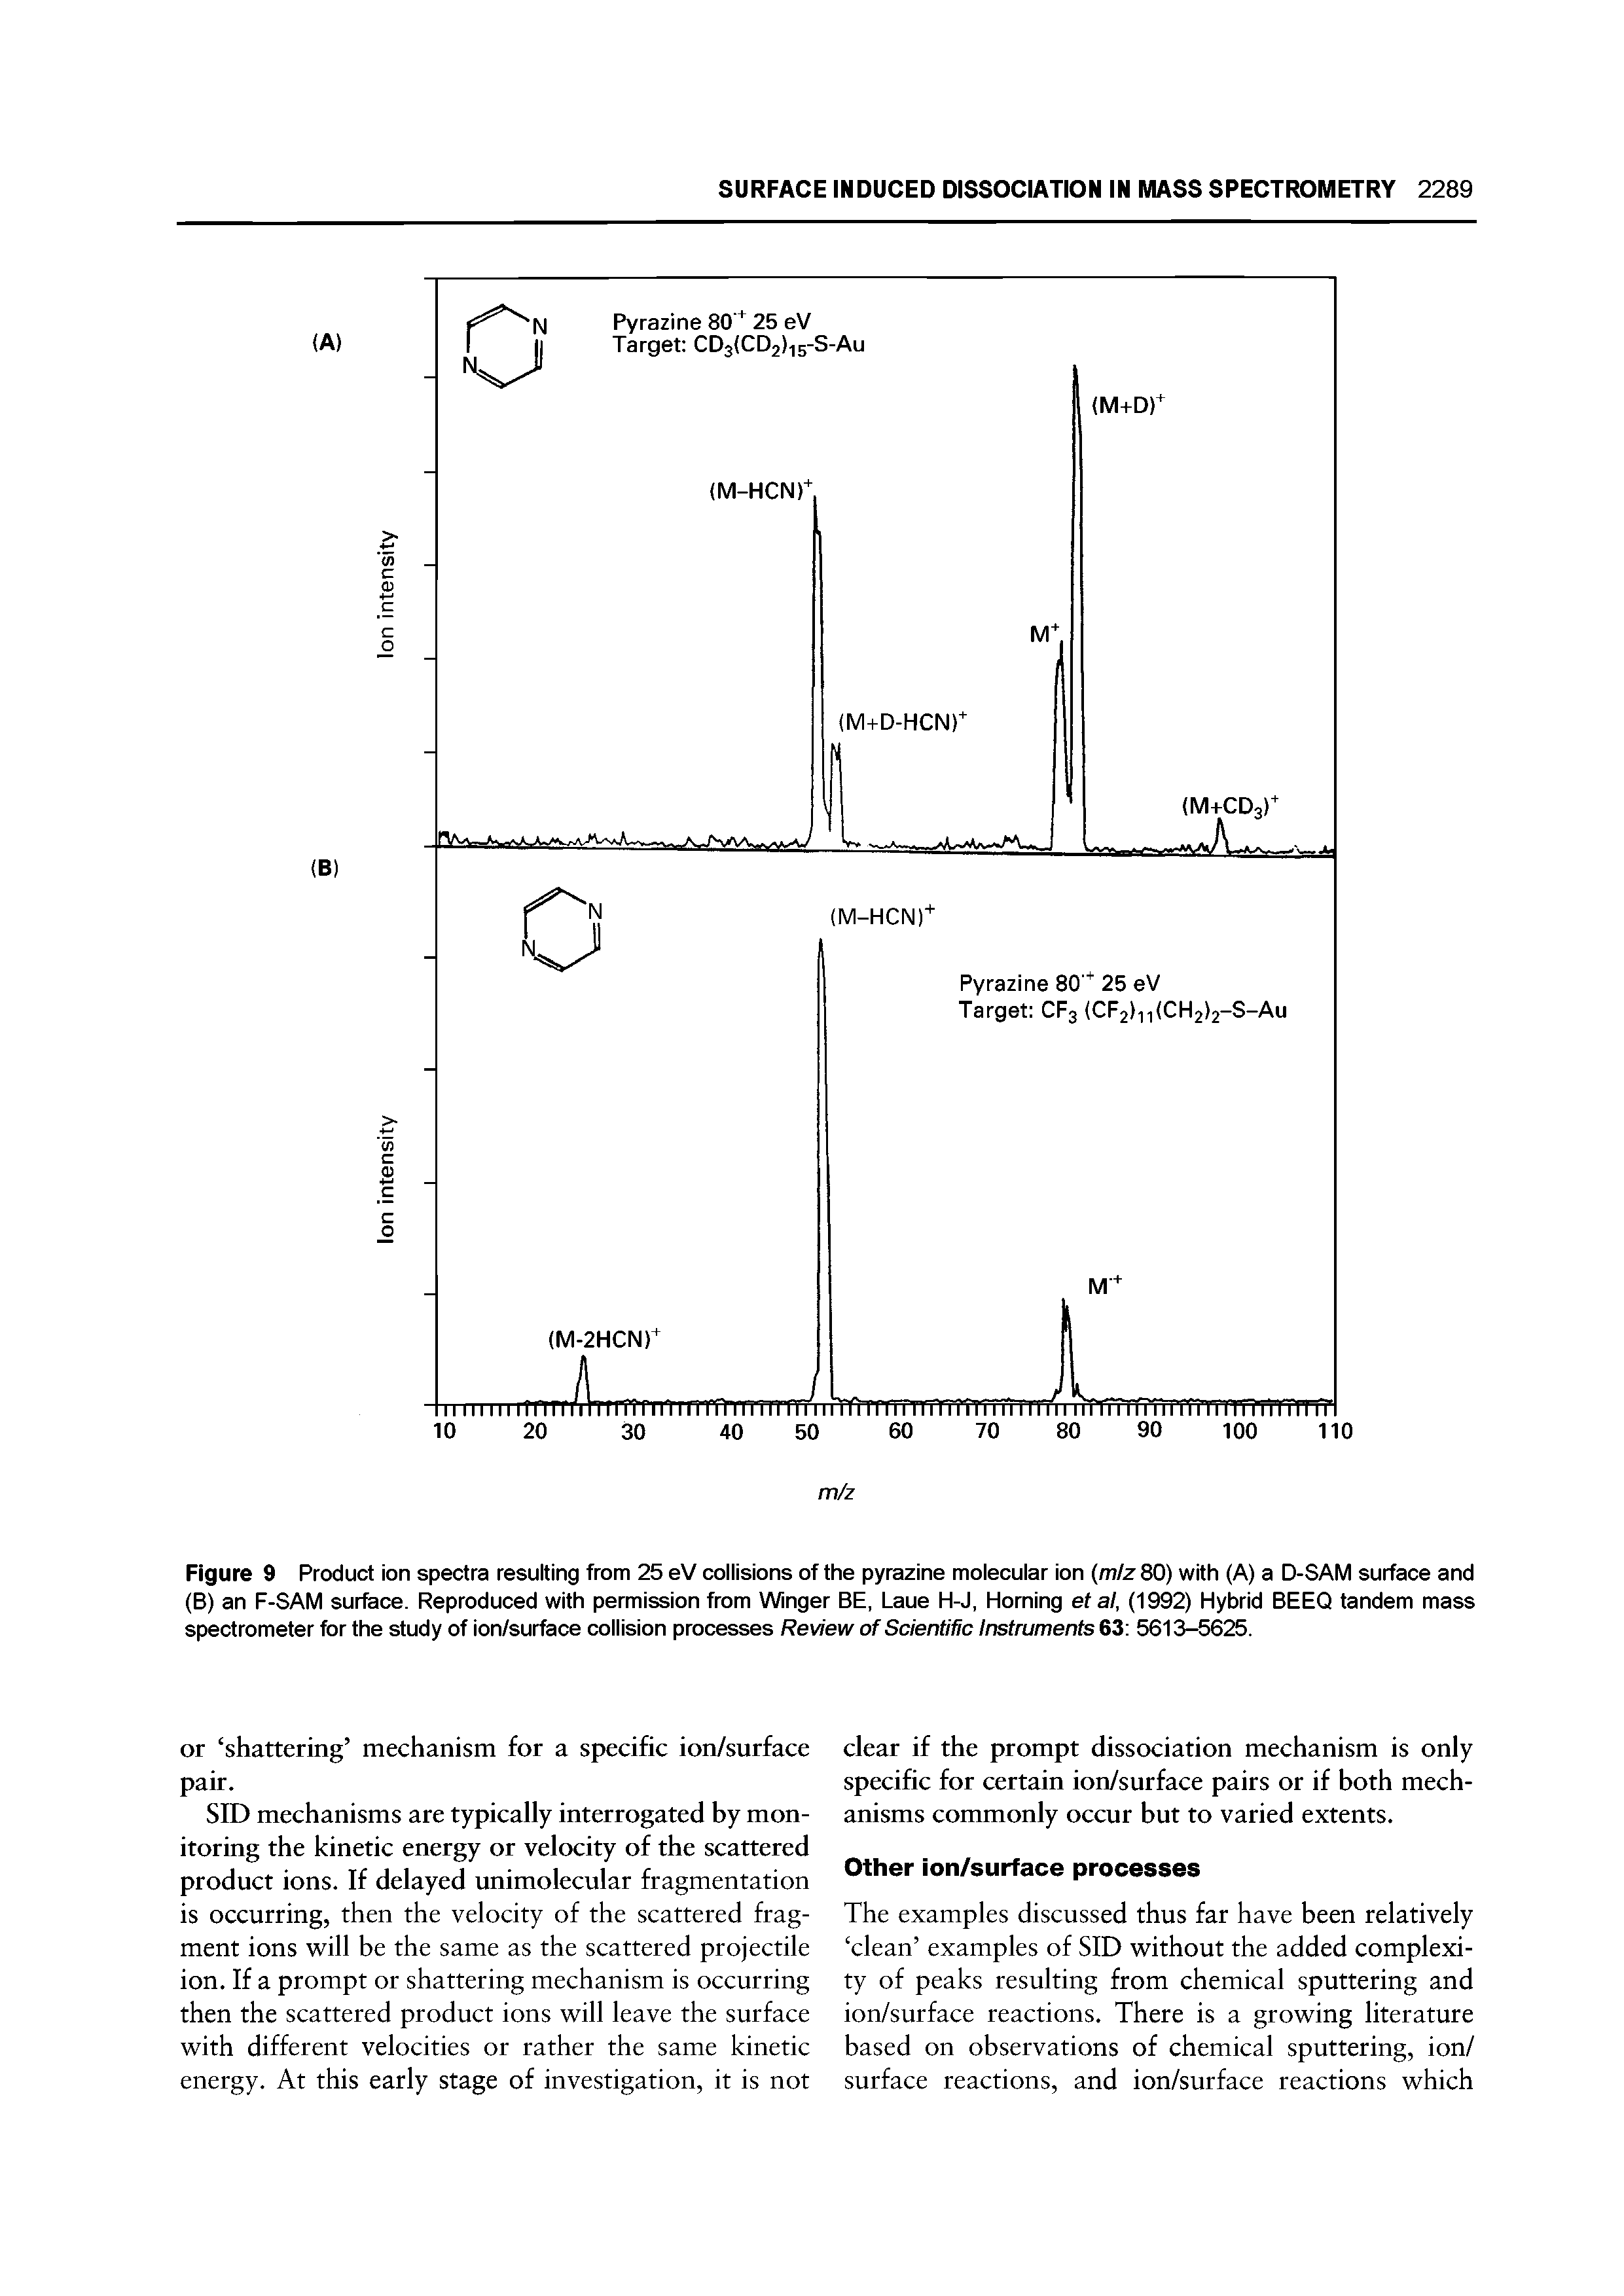 Figure 9 Product ion spectra resulting from 25 eV collisions of the pyrazine molecular ion (mlz 80) with (A) a D-SAM surface and (B) an F-SAM surface. Reproduced with permission from Winger BE, Laue H-J, Homing etal, (1992) Hybrid BEEQ tandem mass spectrometer for the study of ion/surface collision processes Review of Scientific Instruments 63 5613-5625.